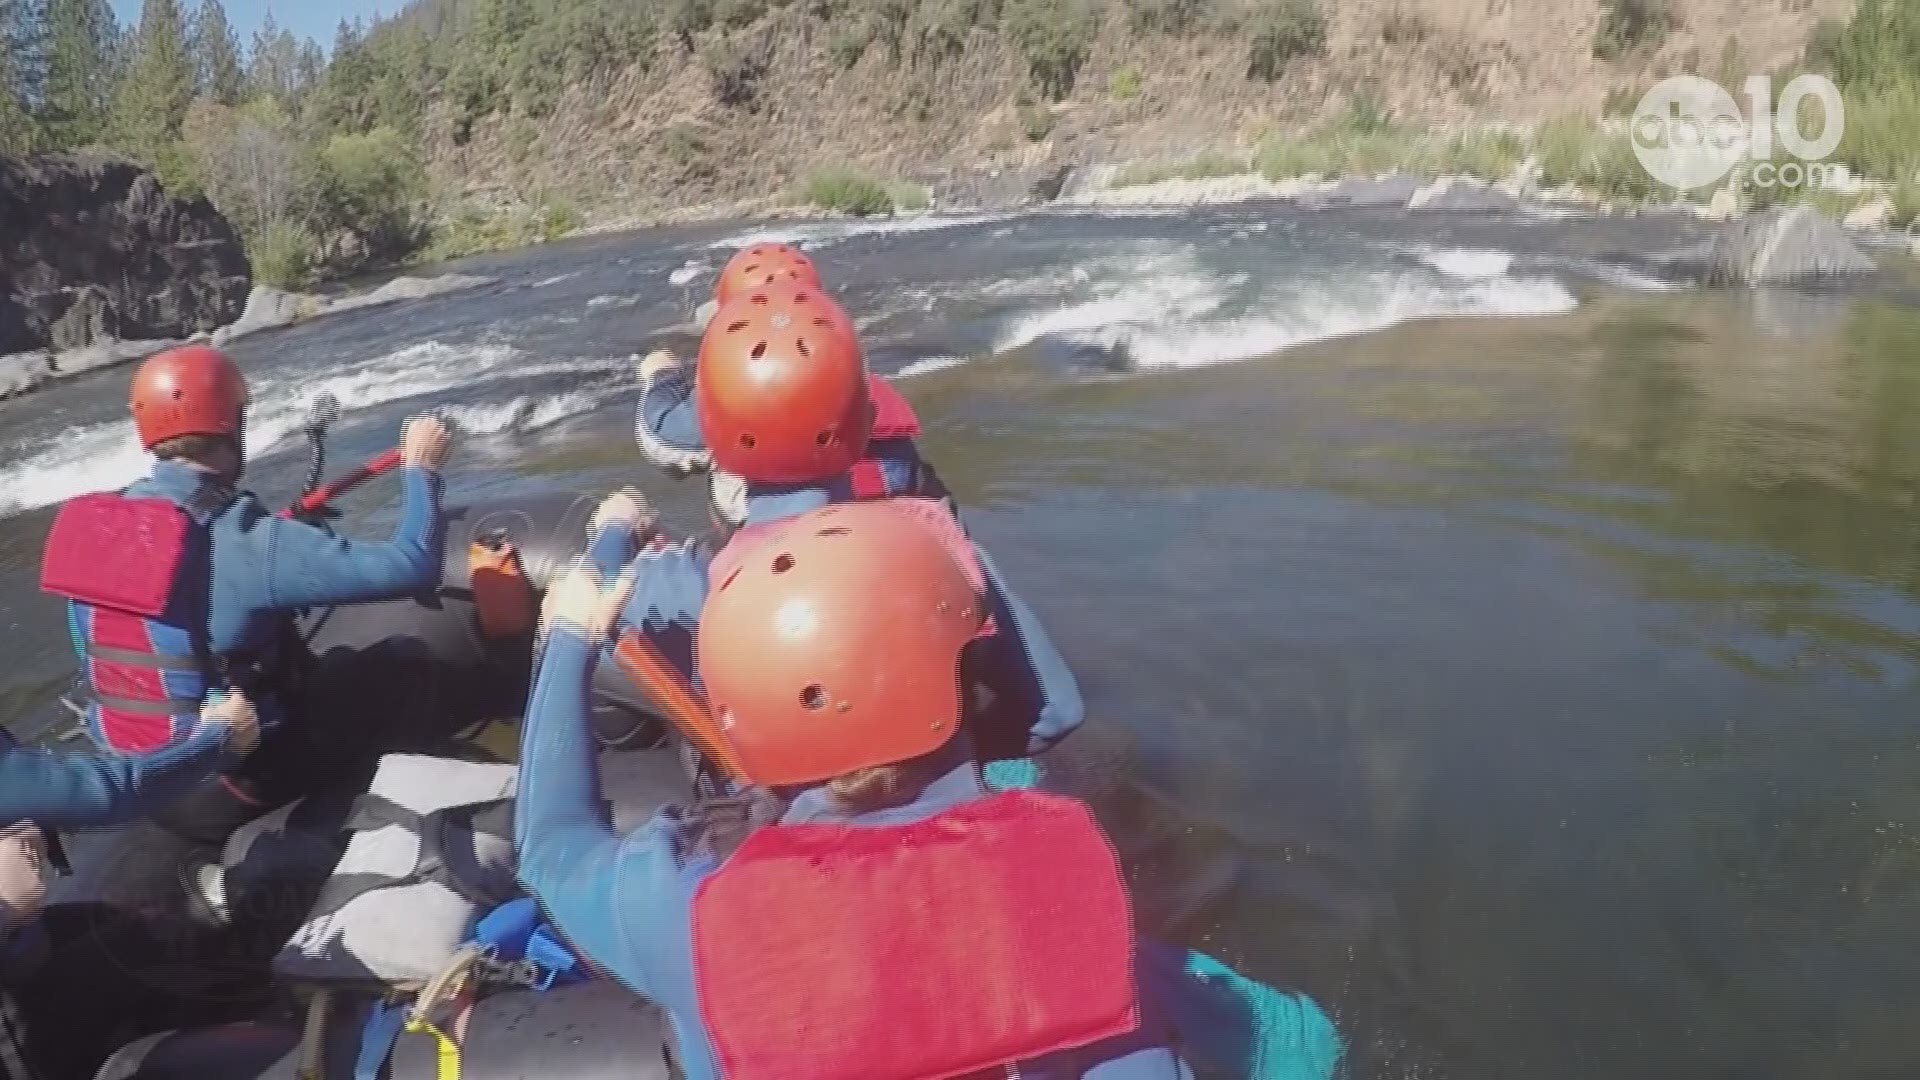 There aren't many places where you can go rafting underground, but John Bartell found one in Placer County and had to try it.